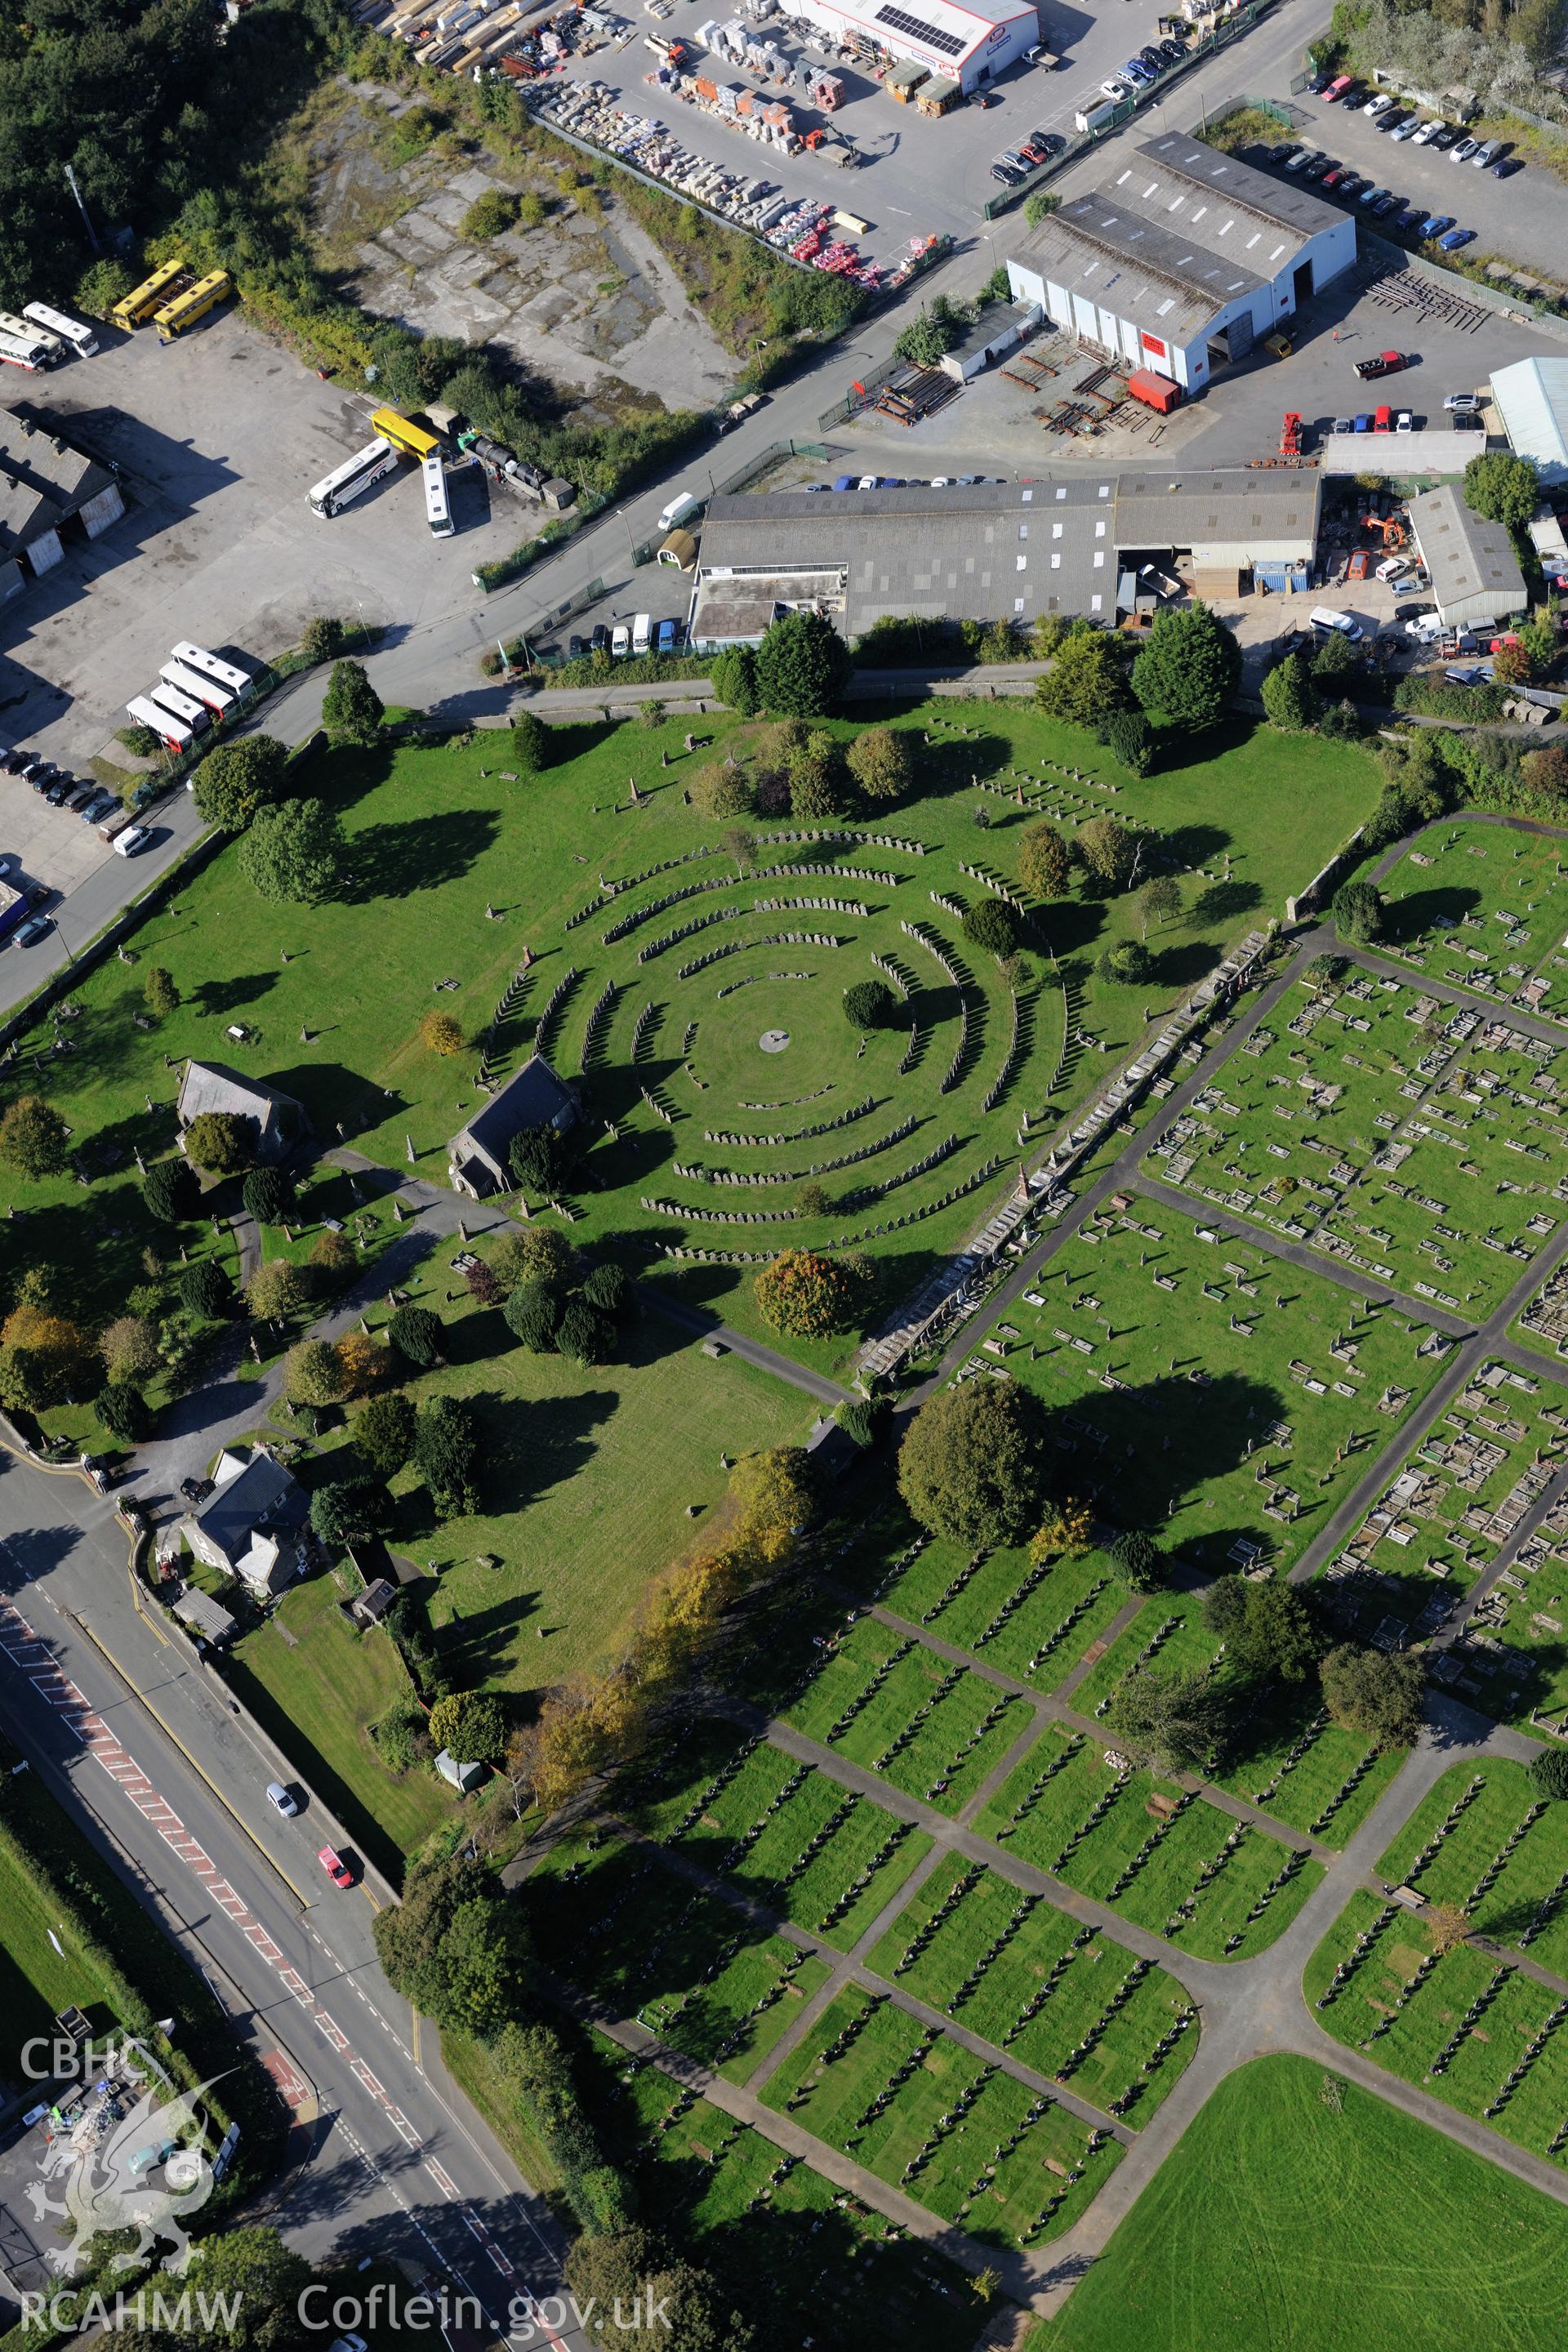 Llanion Nonconformist cemetery and cemetery chapel, London Road, Llanion, Pembroke Dock. Oblique aerial photograph taken during the Royal Commission's programme of archaeological aerial reconnaissance by Toby Driver on 30th September 2015.